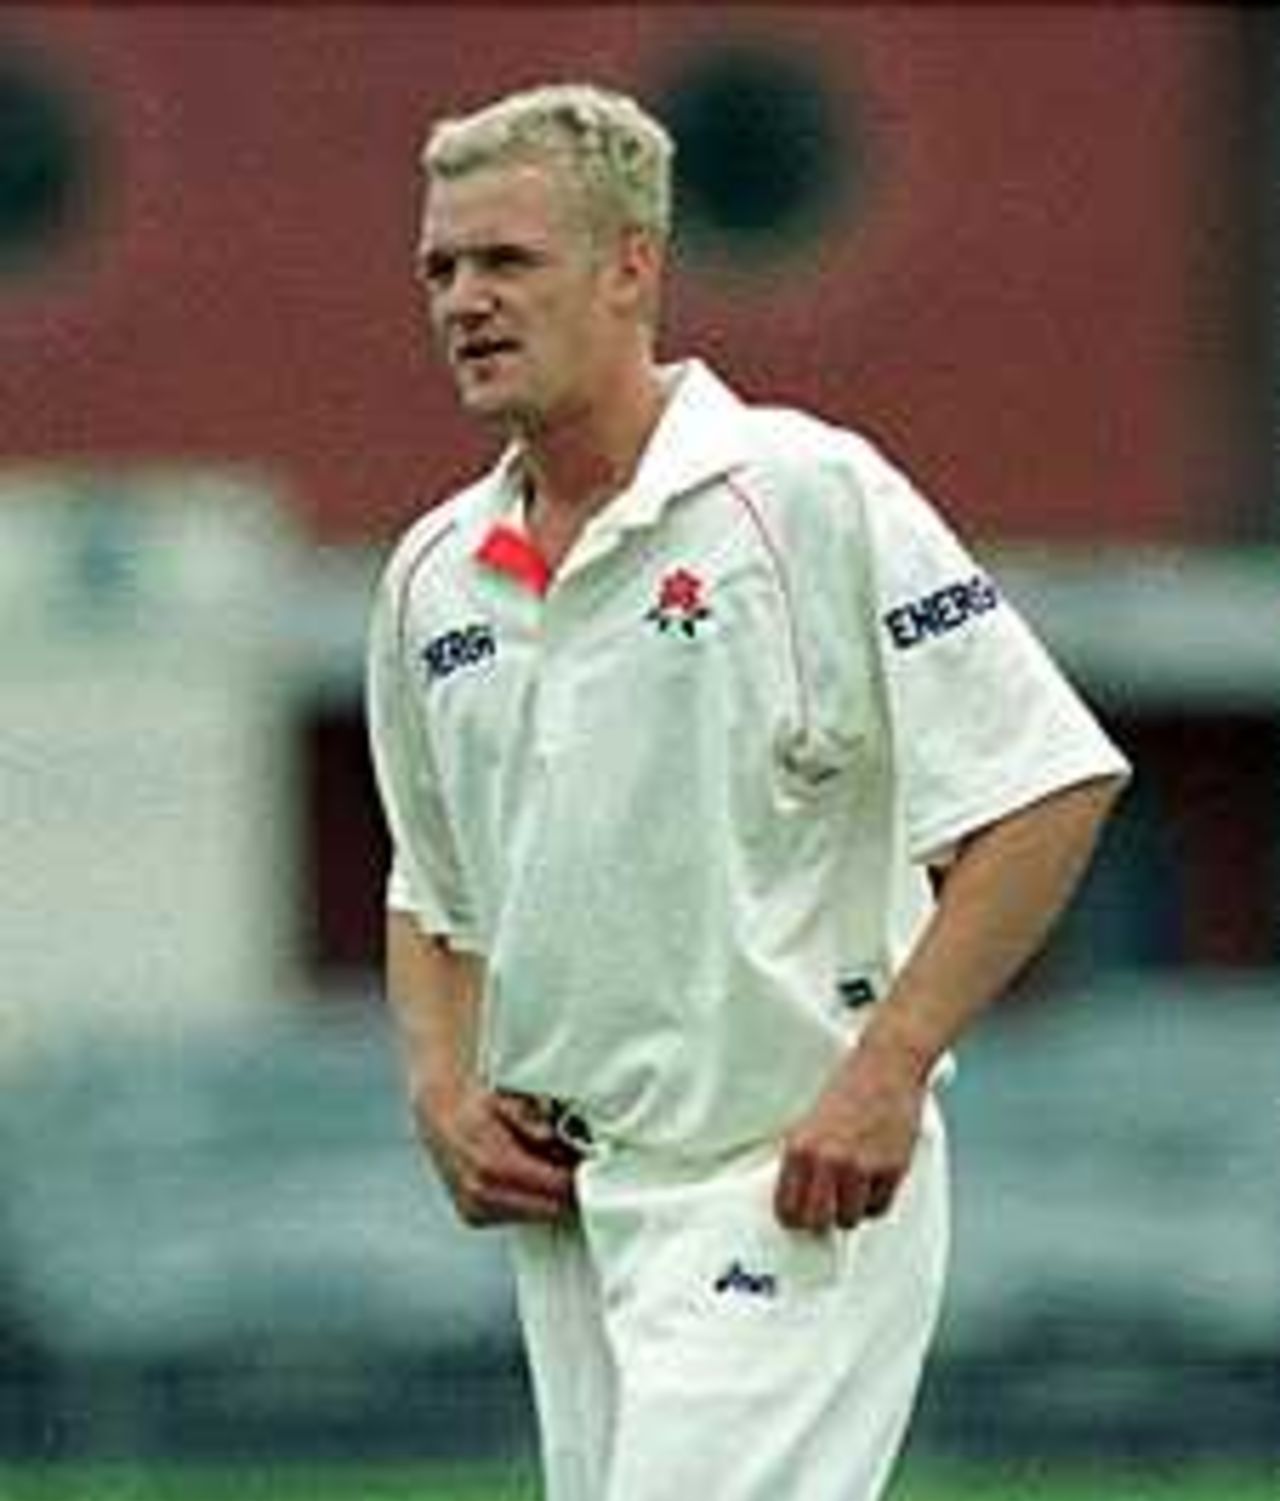 Richard Green starting his run up for his next delivery, Lancashire v Yorkshire, Day 1 of County Championship match, 19 Aug 1999